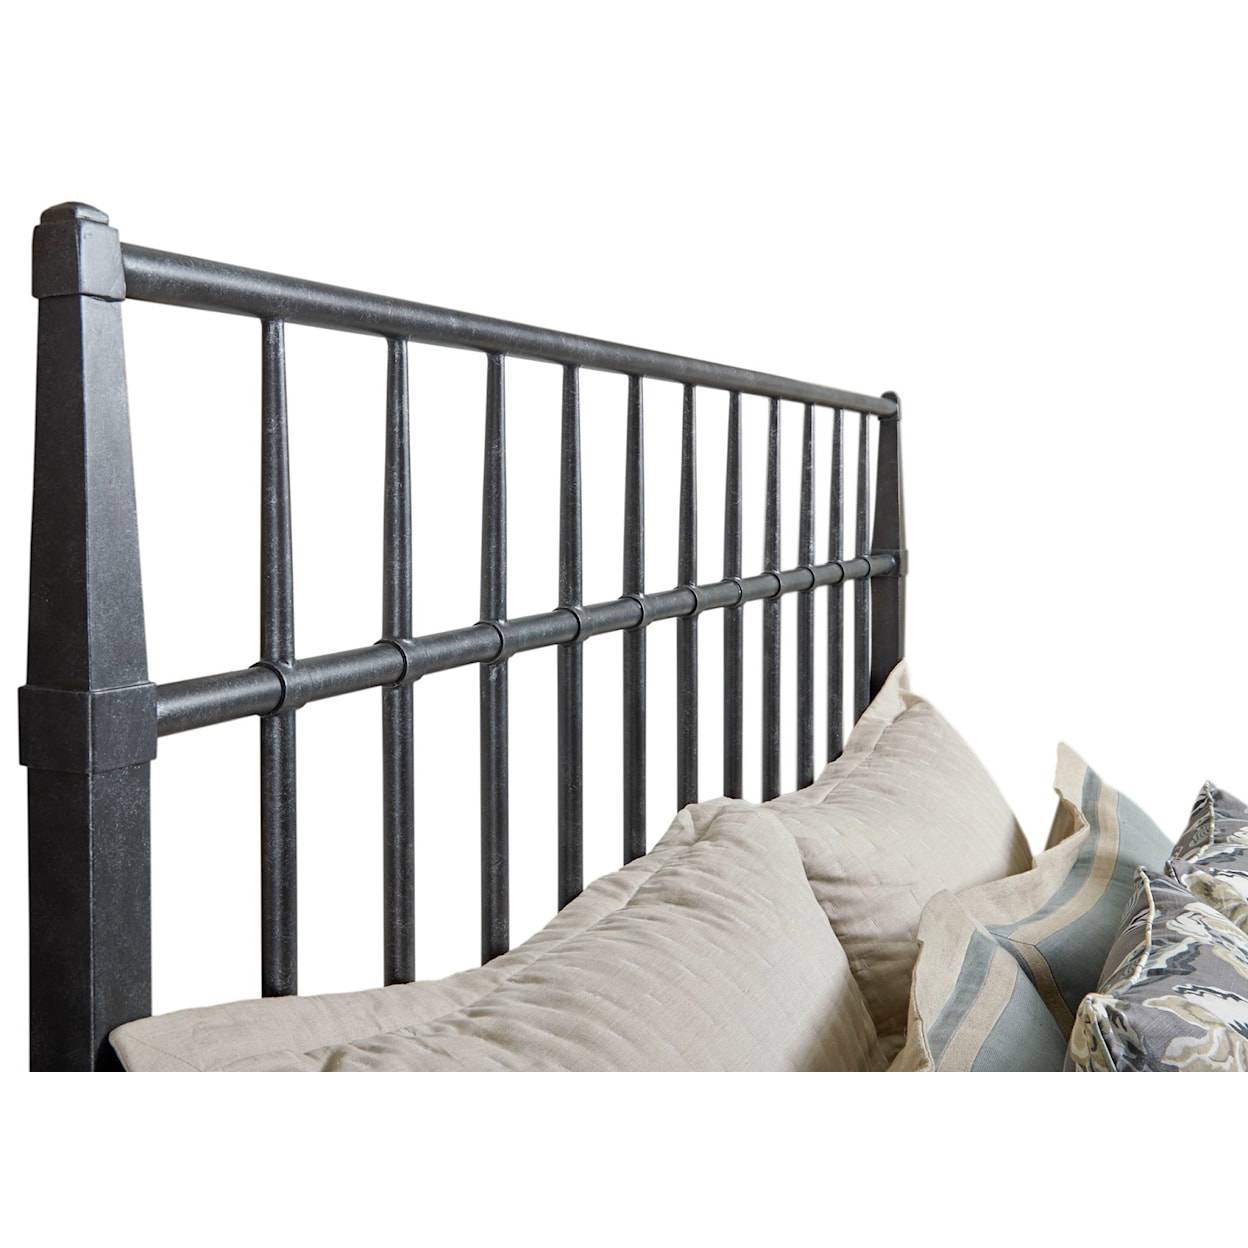 Kincaid Furniture Abode Queen Metal Bed